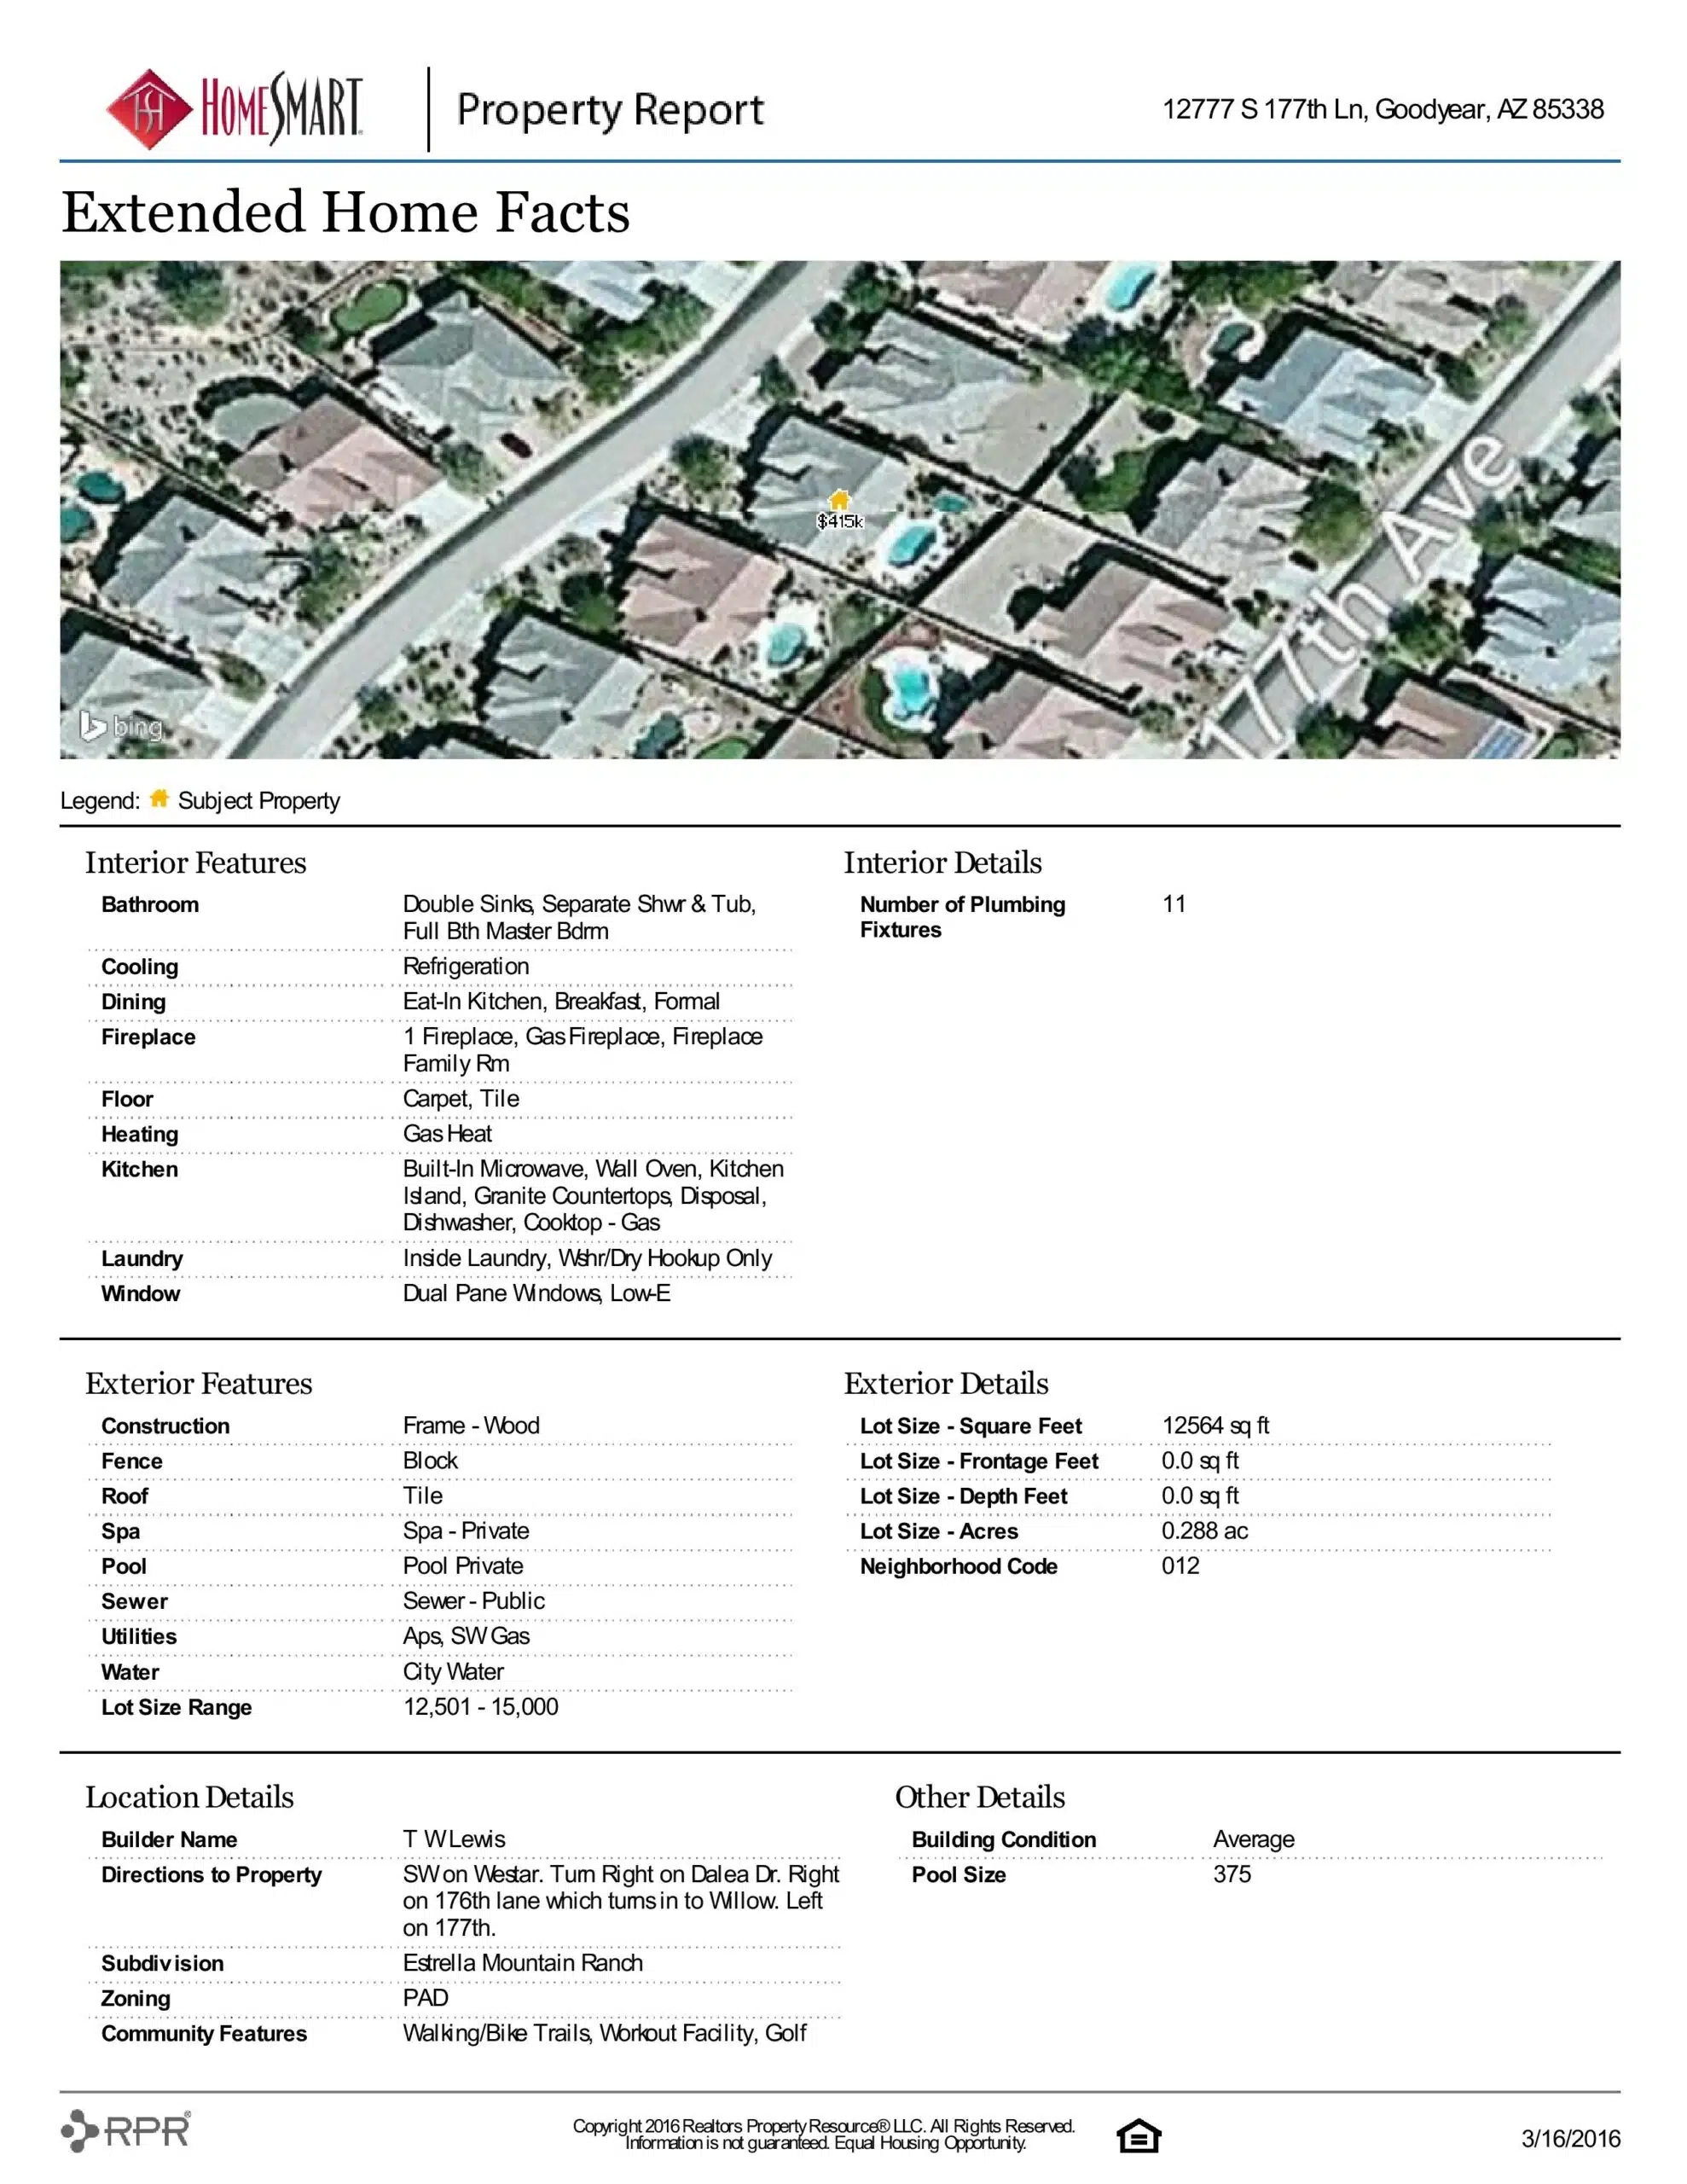 12777 S 177TH LANE PROPERTY REPORT-page-004